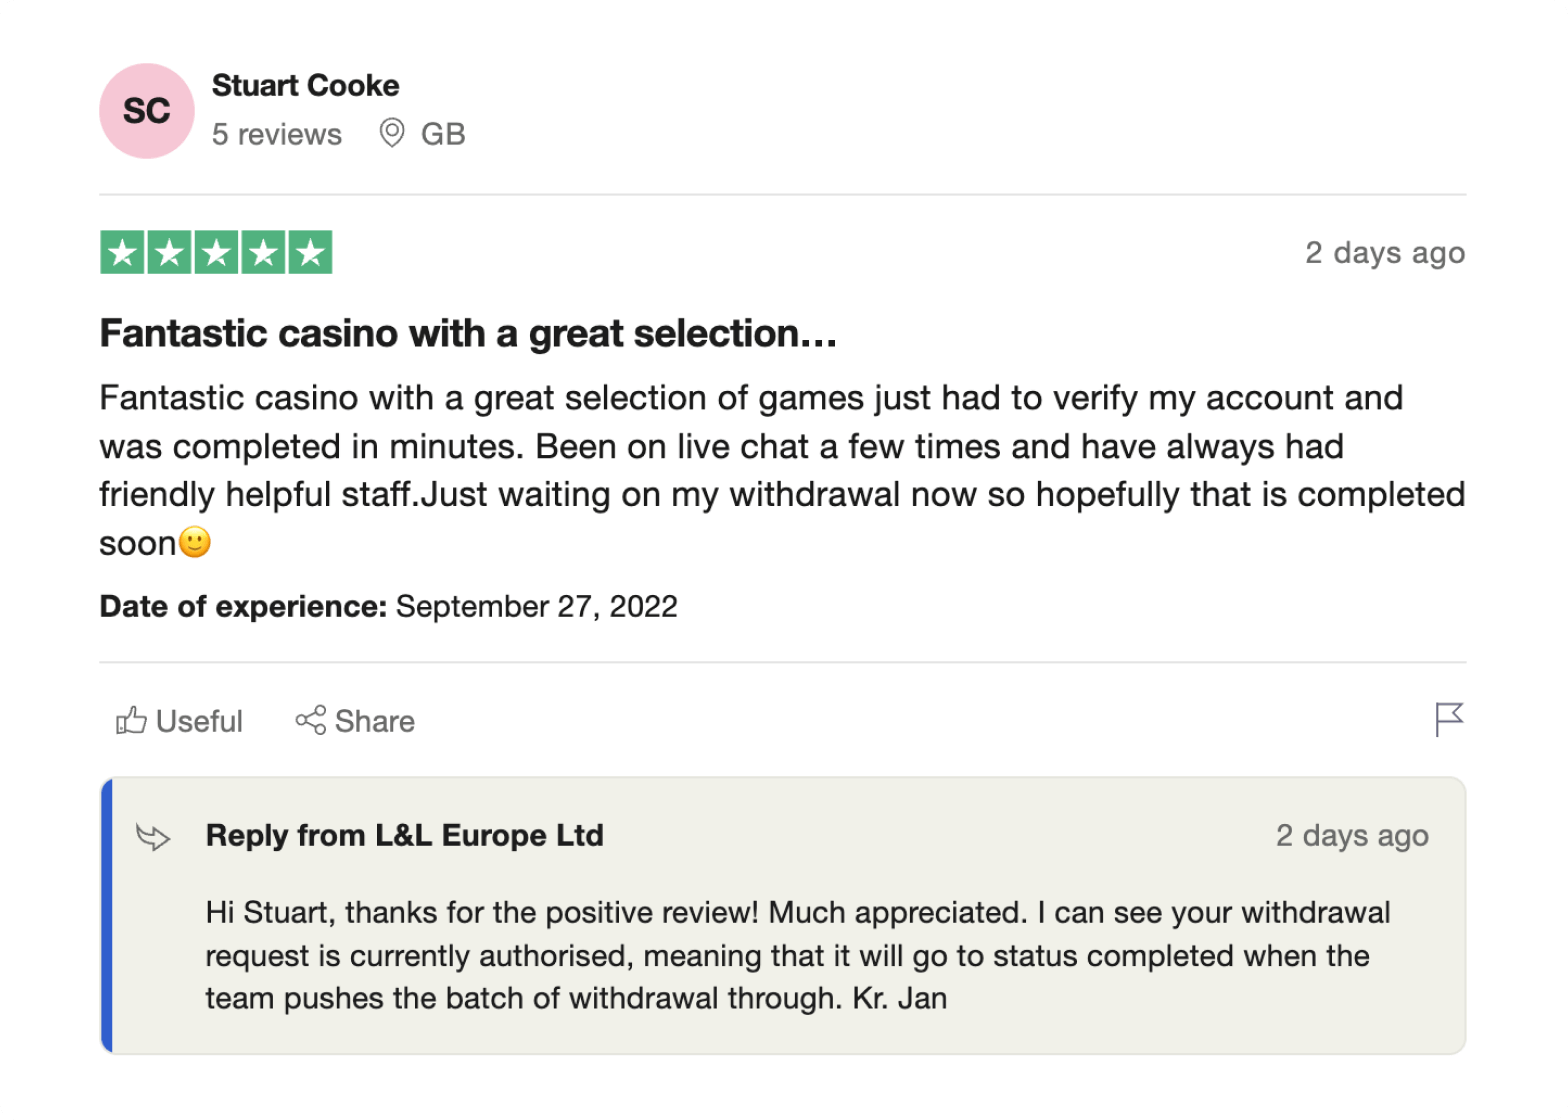 User review and company comment on Trustpilot for the All British Casino parent company